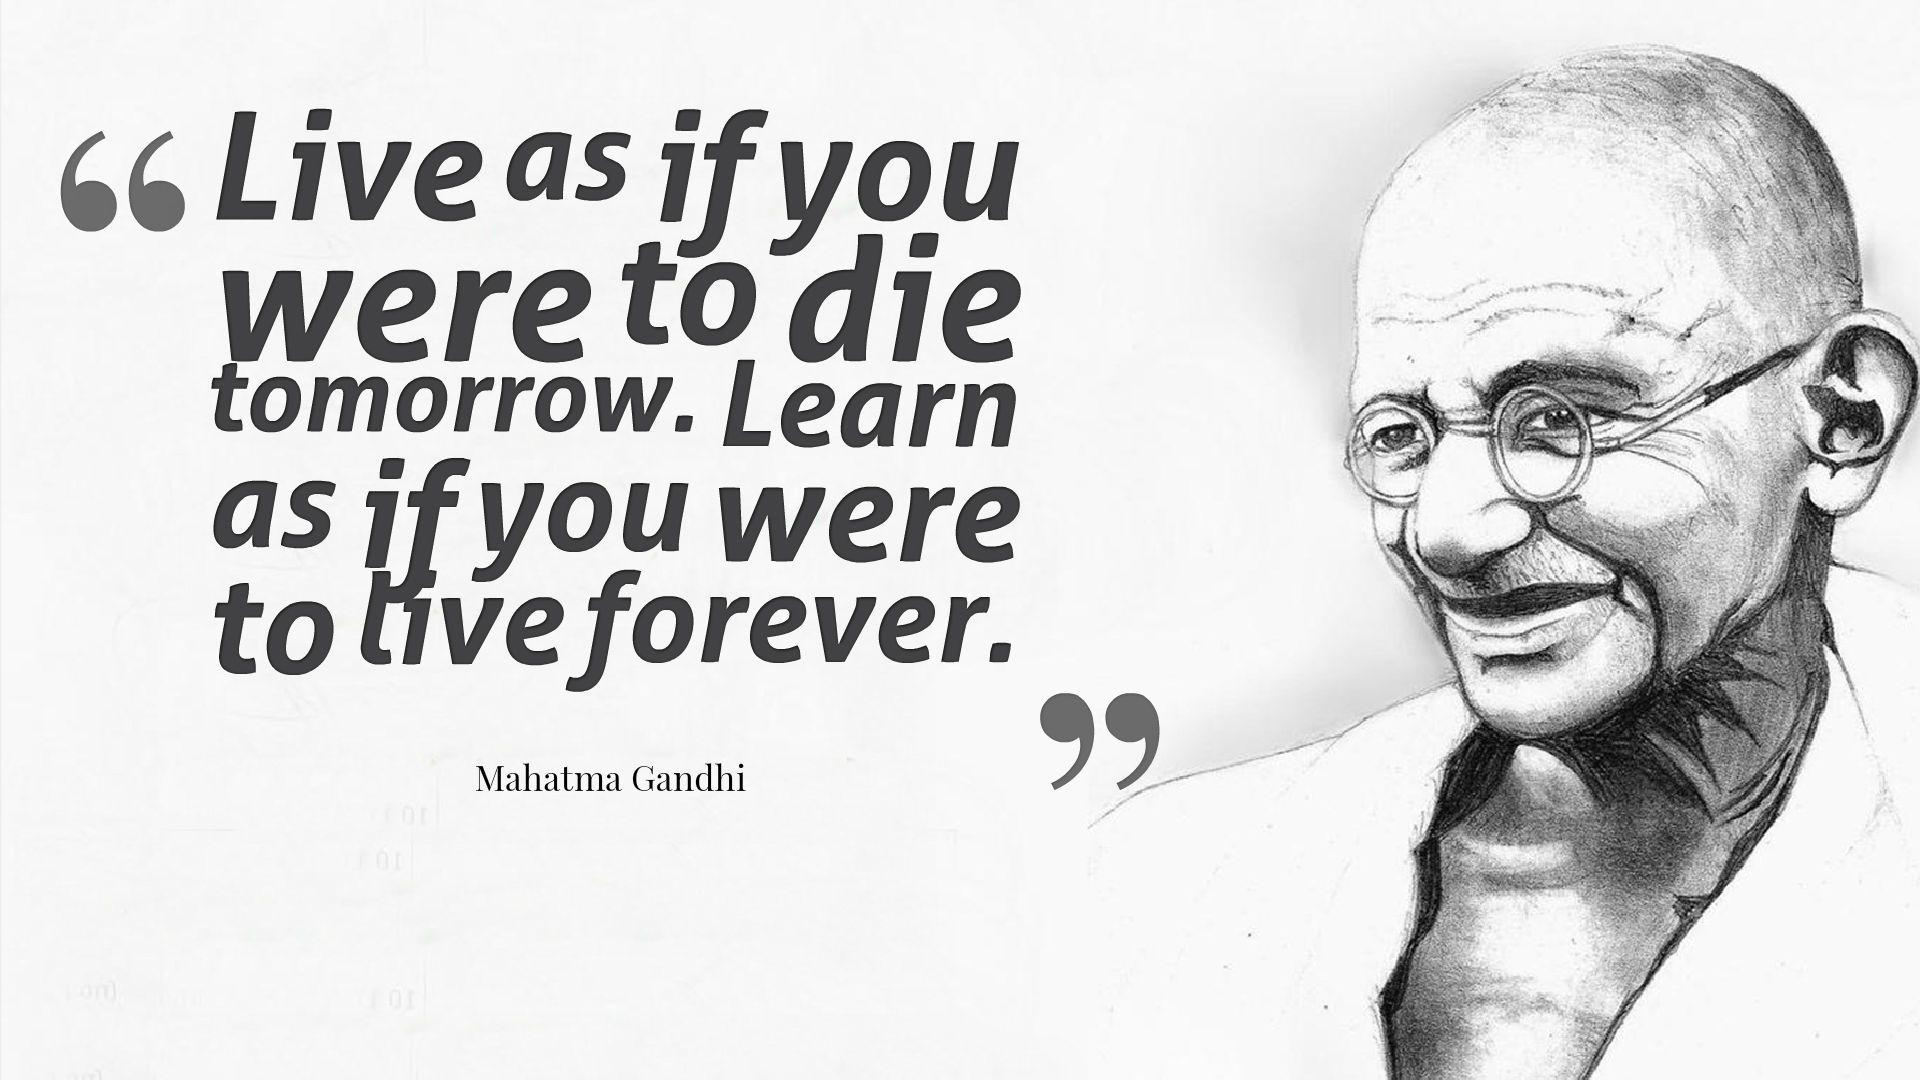 famous quotes by mahatma gandhi